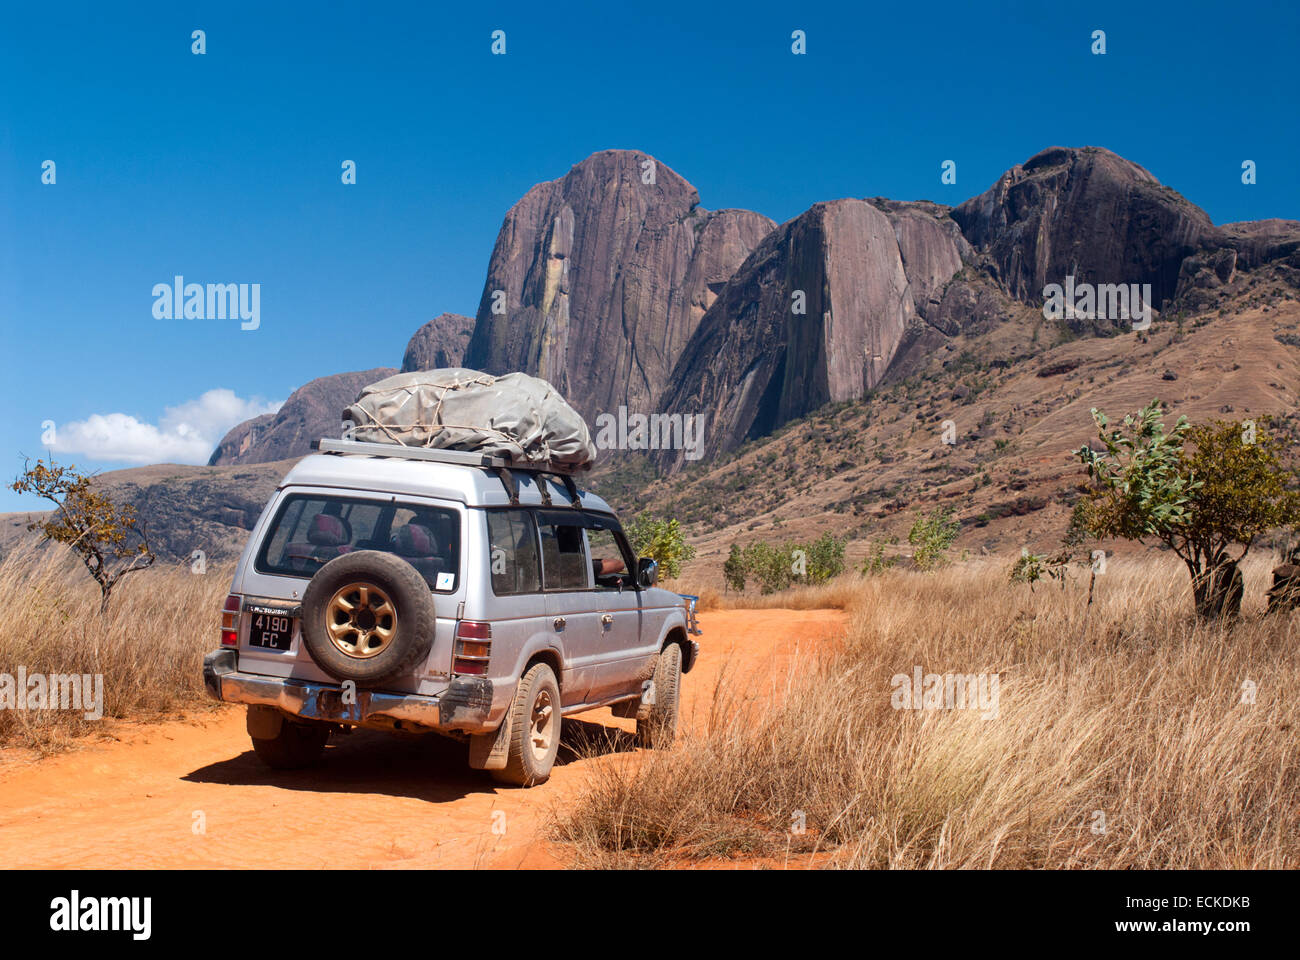 a-4x4-on-the-approach-to-the-tsaranoro-massif-madagascar-ECKDKB.jpg